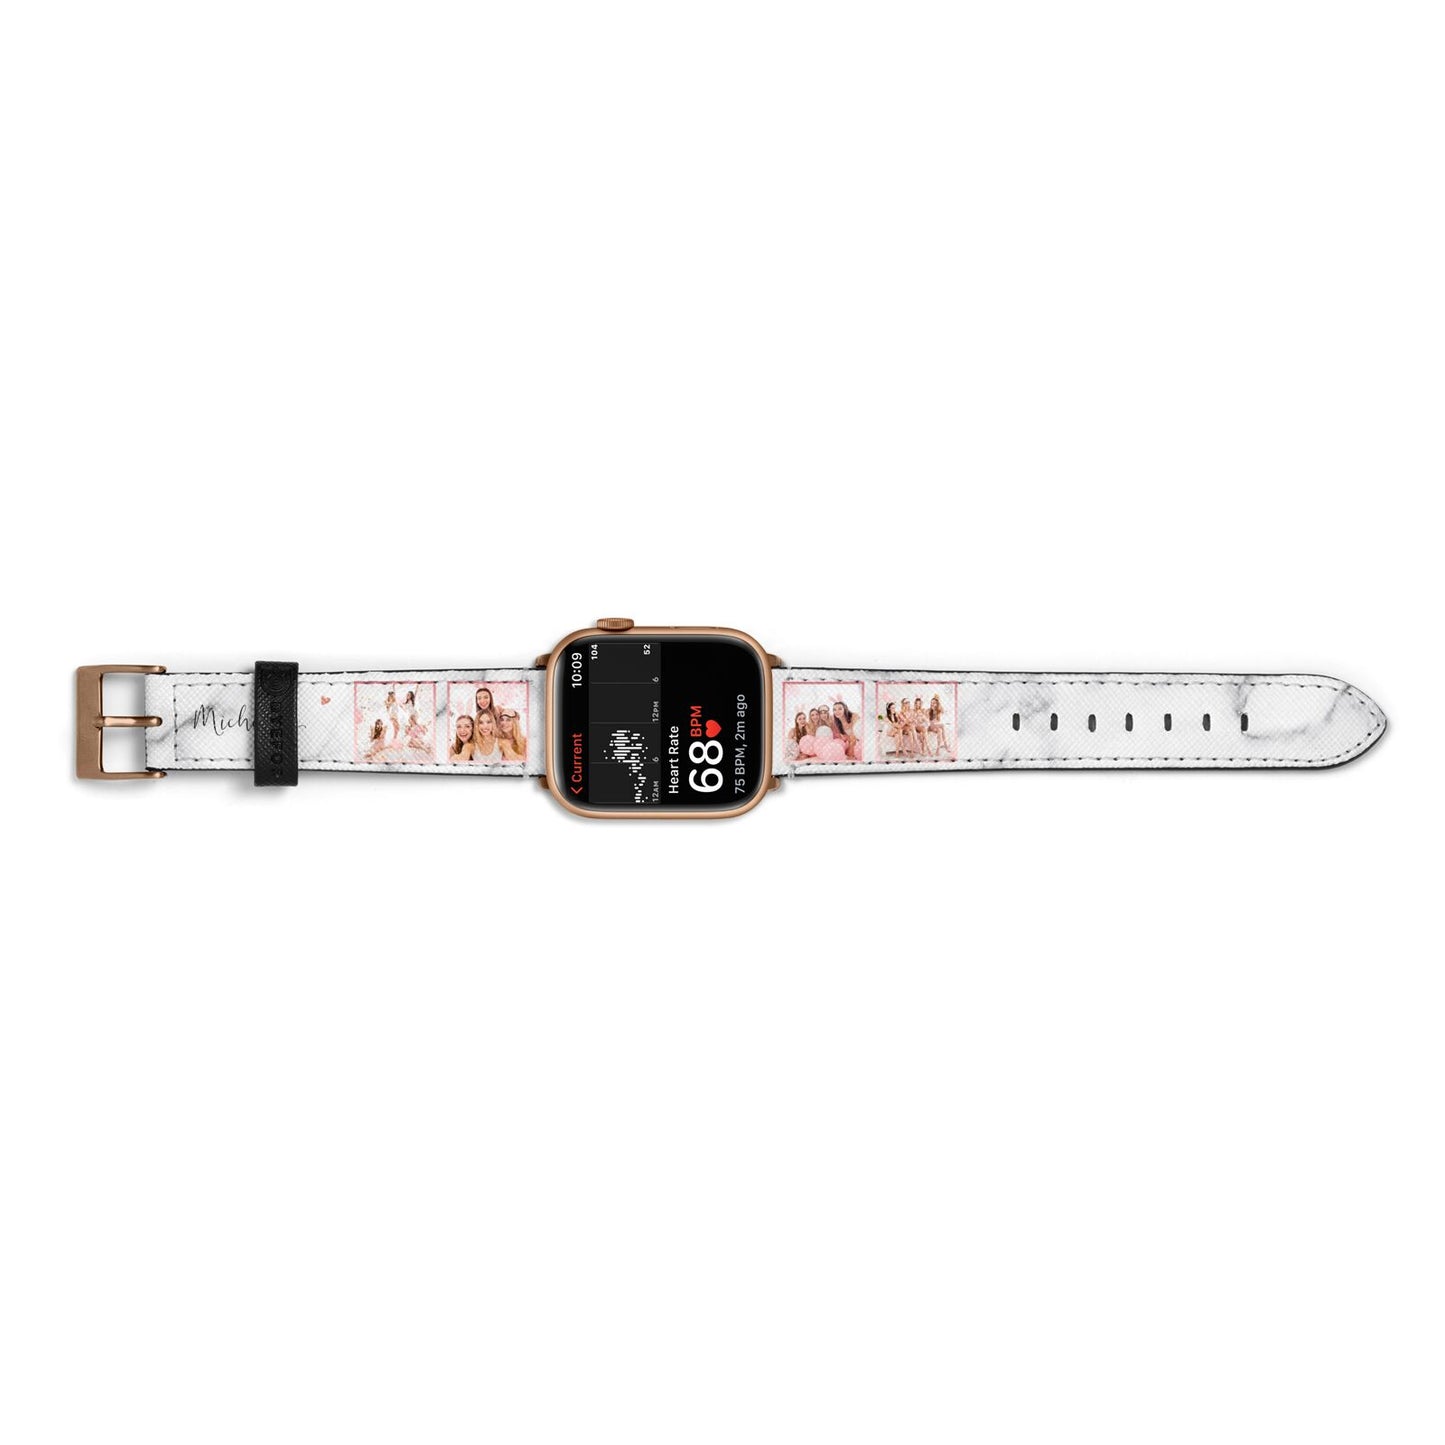 Marble Photo Strip Personalised Apple Watch Strap Size 38mm Landscape Image Gold Hardware